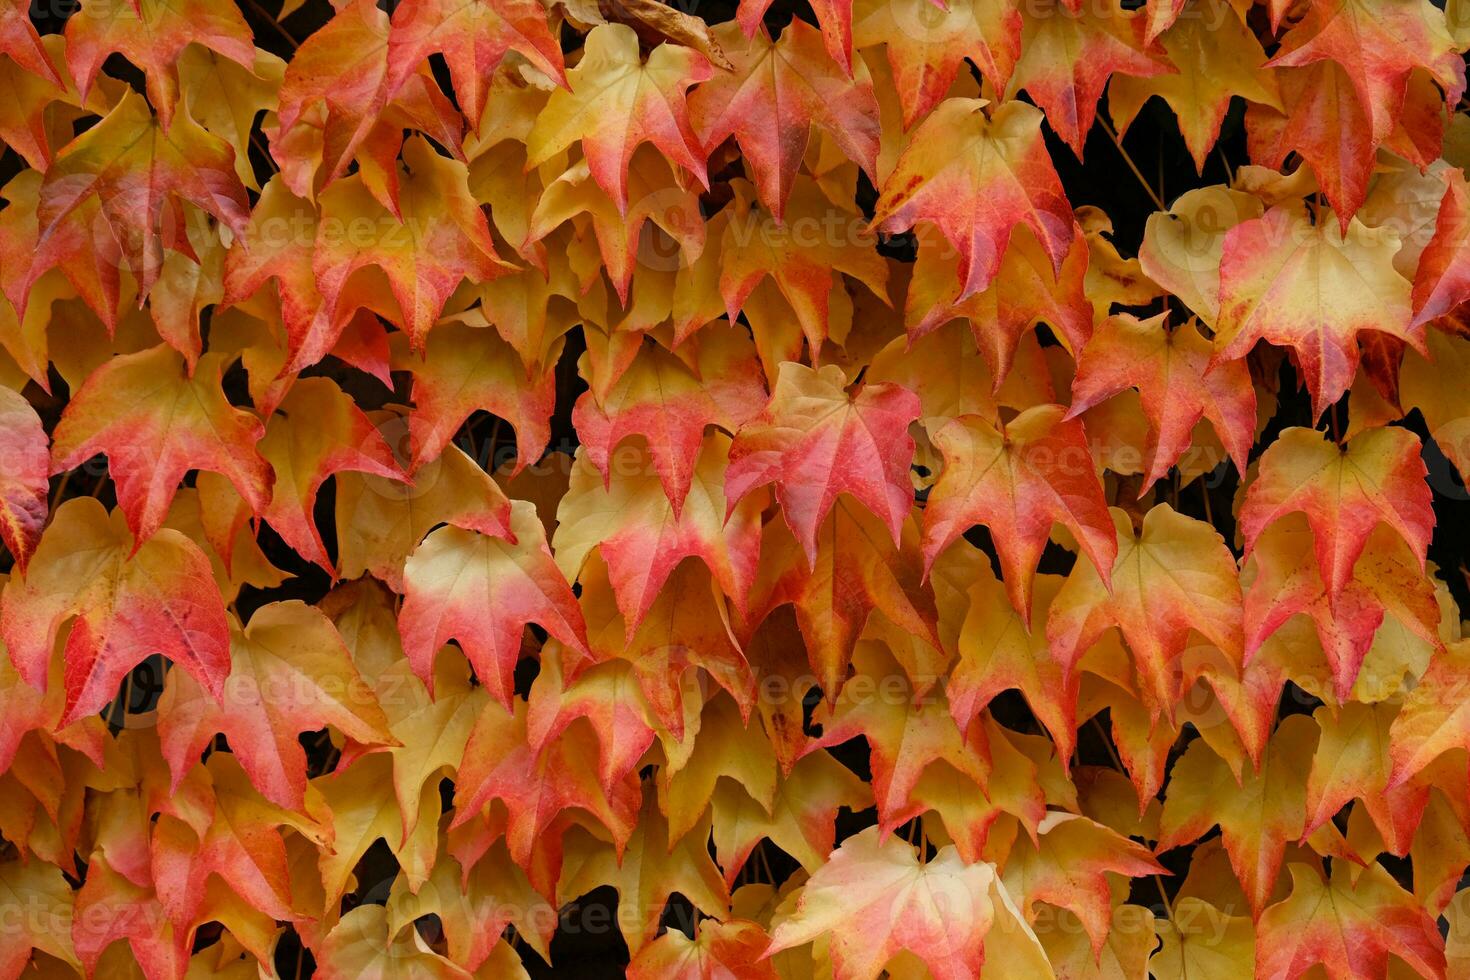 Autumn colors bright pink, yellow, green leaves of maiden grapes on wall in fall. Bright colors of autumn. Parthenocissus tricuspidata or Boston ivy changing color in Autumn. Nature pattern photo